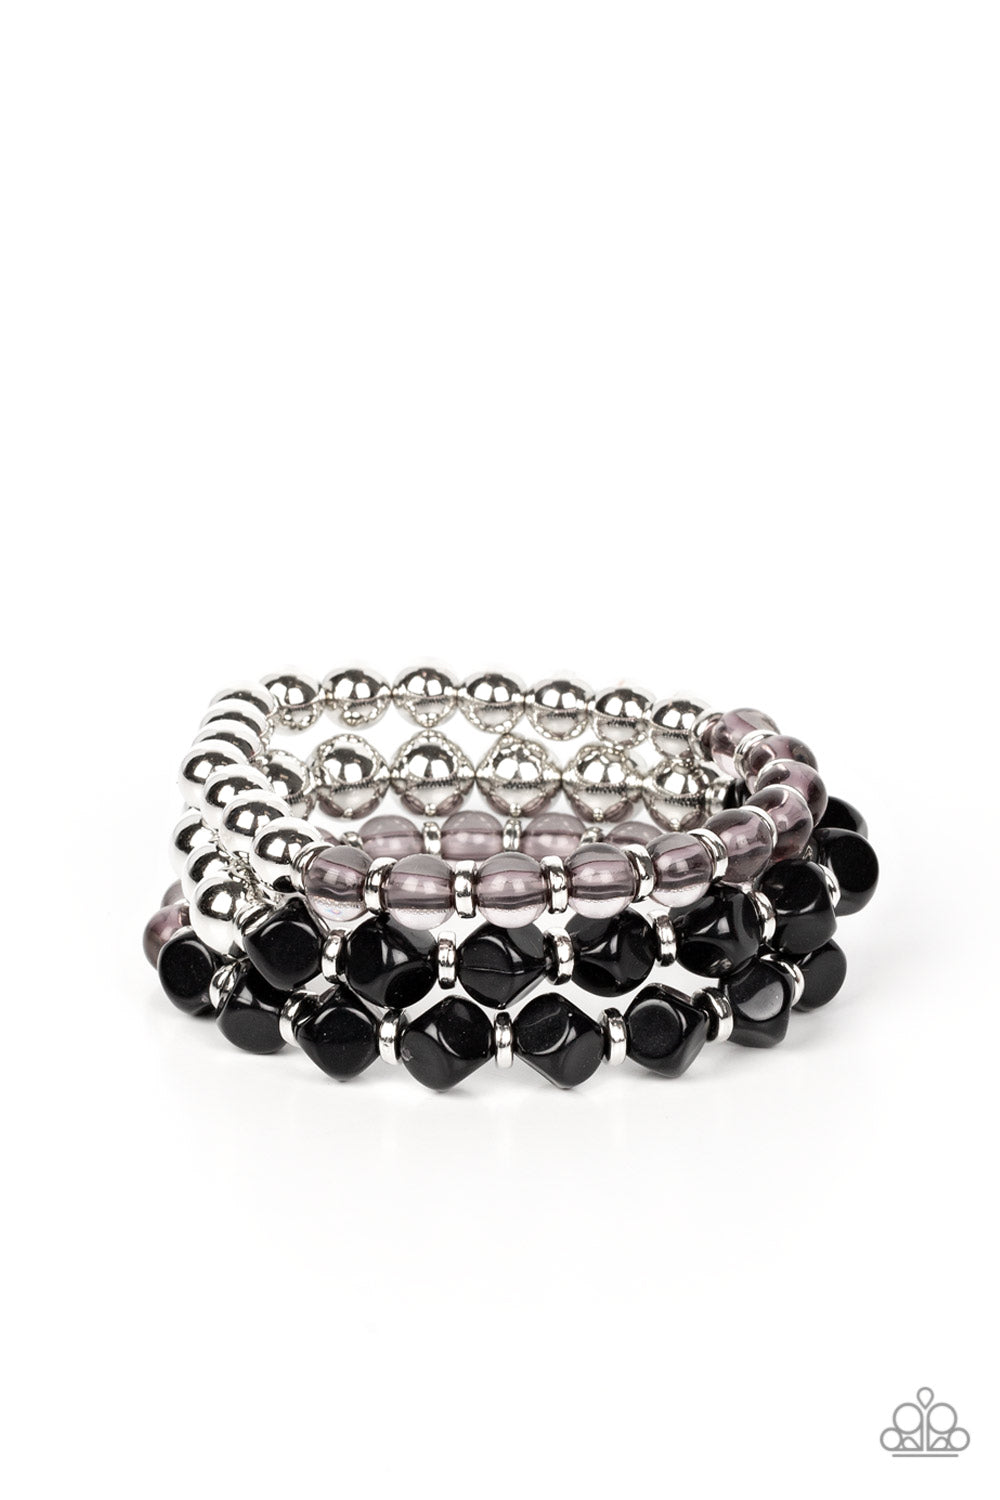 Summer Sabbatical - Black Beads,  Silver Beads, Silver Accents Set of 3 Paparazzi Bracelets